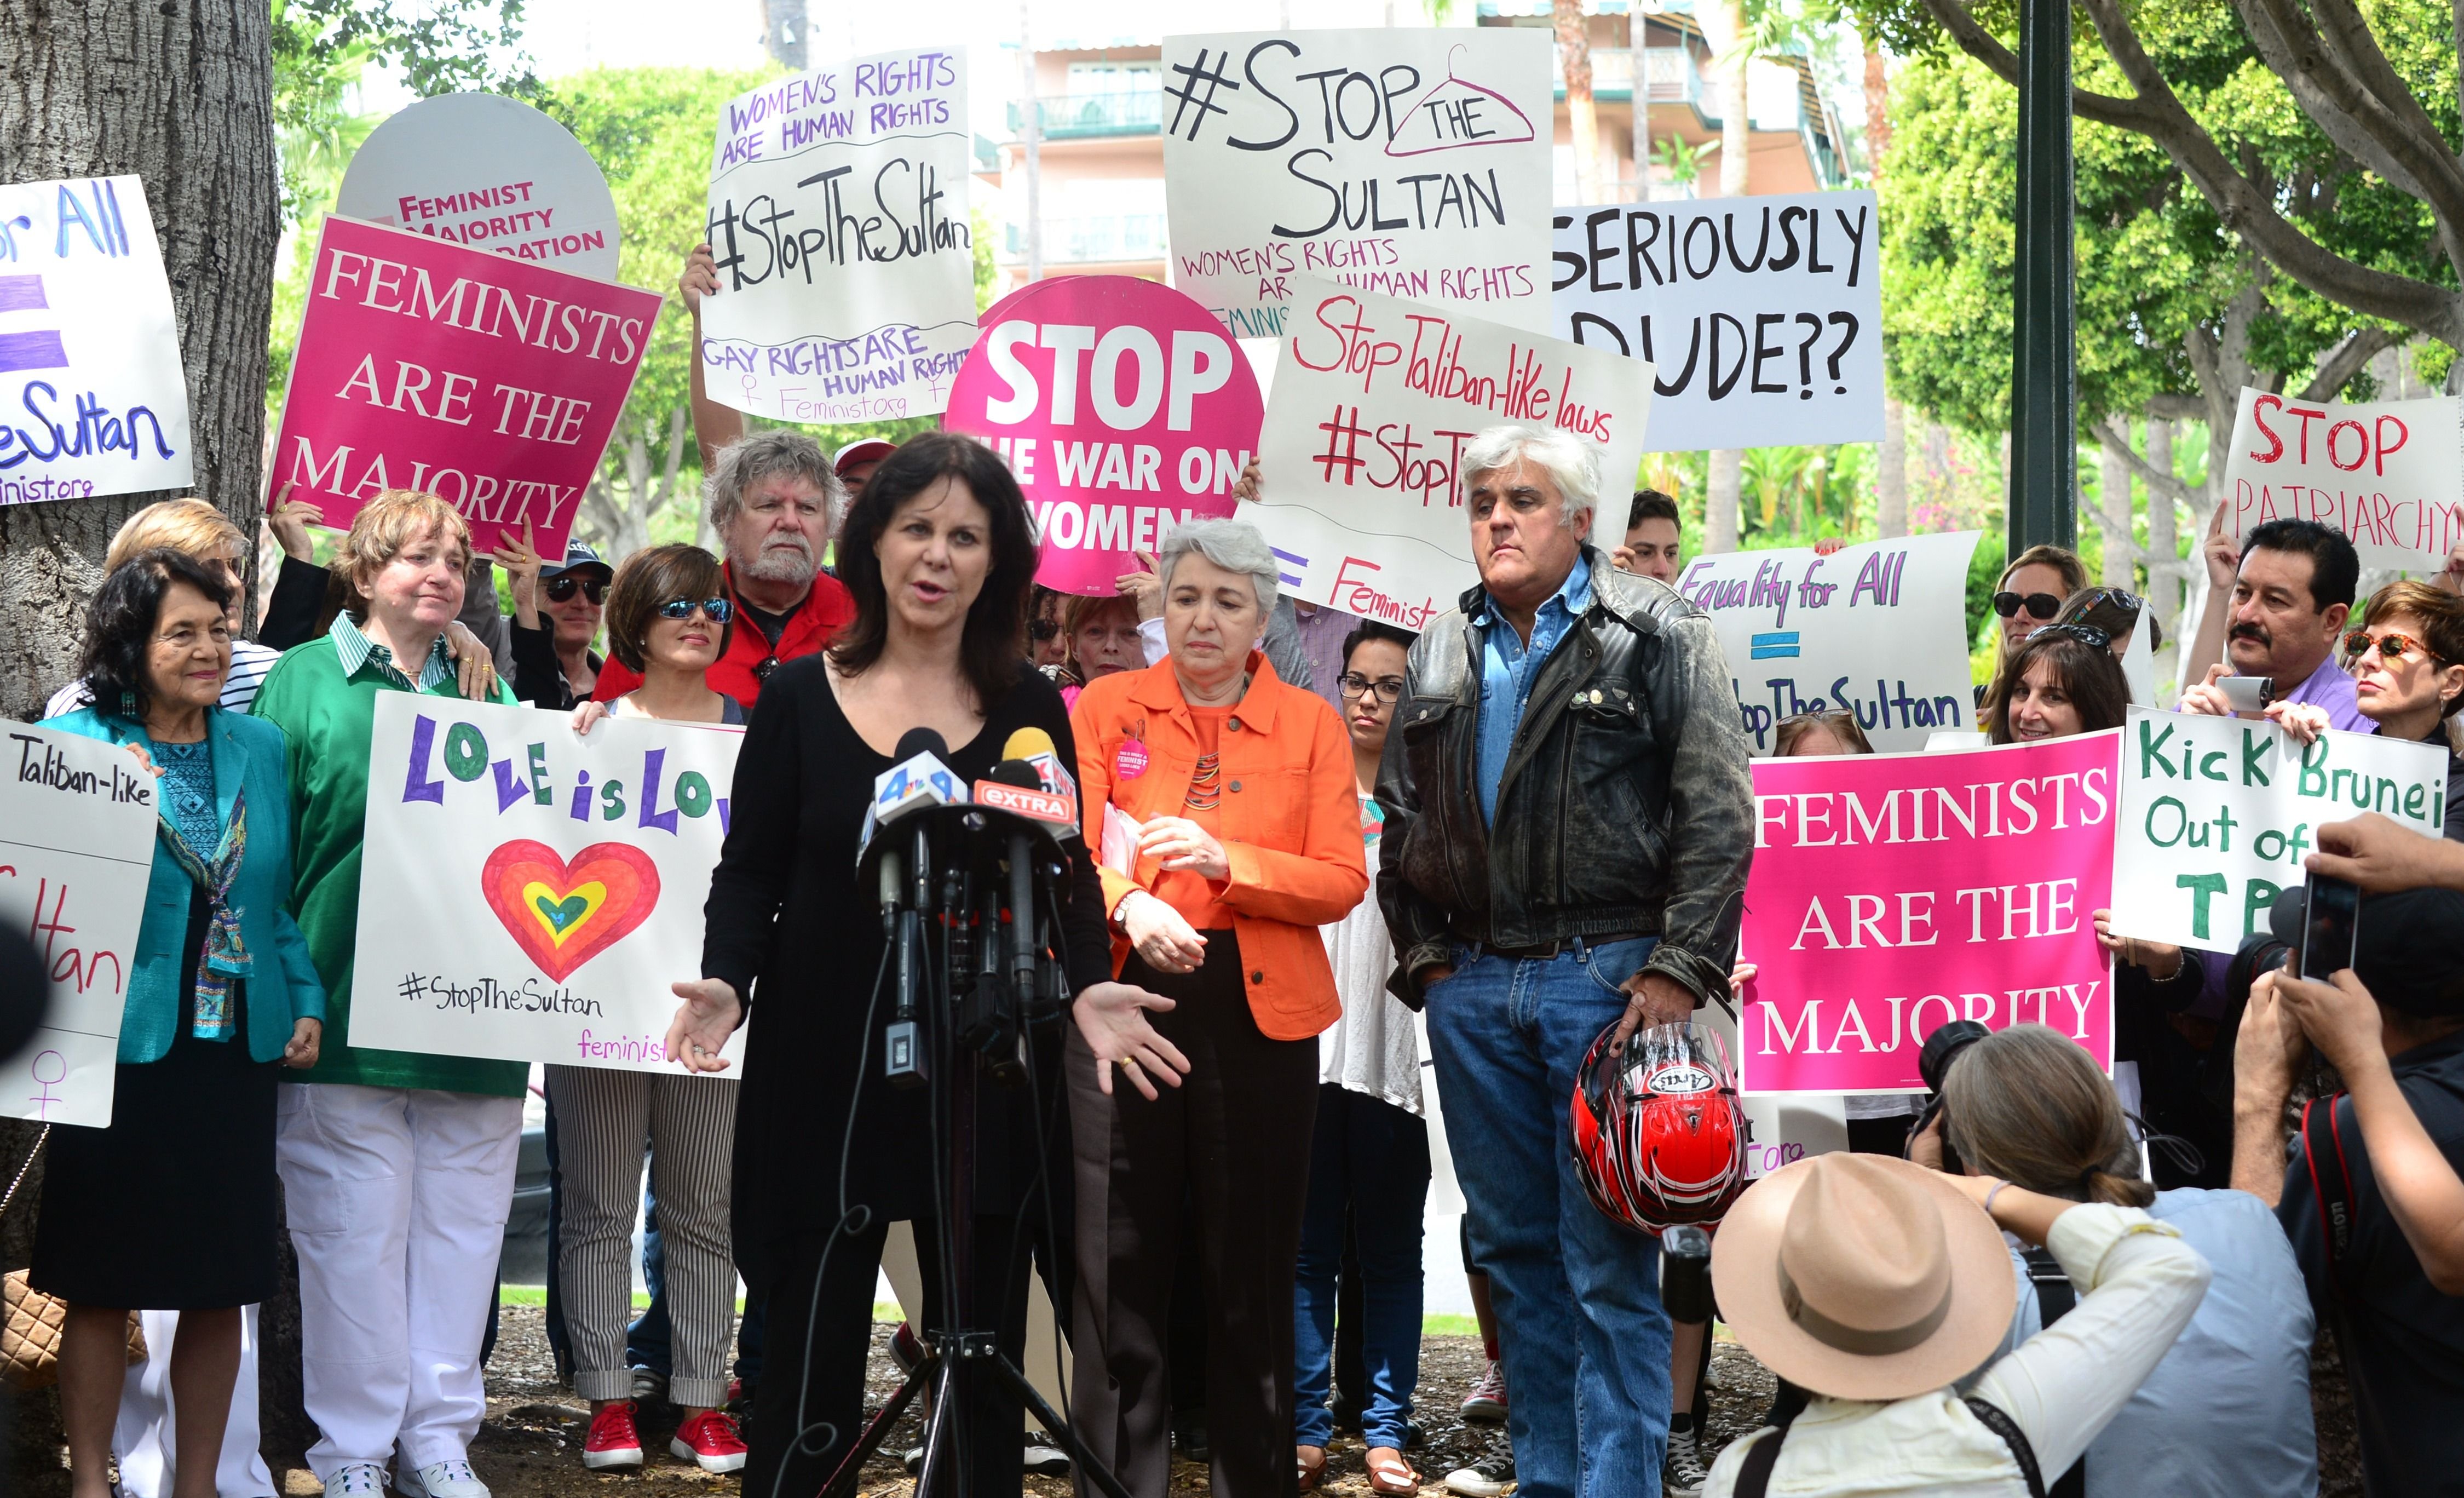 Jay Leno watches as his wife Mavis speaks to supporters of women's rights and LGBT groups at a protest across from the Beverly Hills Hotel, owned by the Sultan of Brunei, on May 5, 2014 in Beverly Hills, Calif. (Frederic J. Brown—AFP/Getty Images)